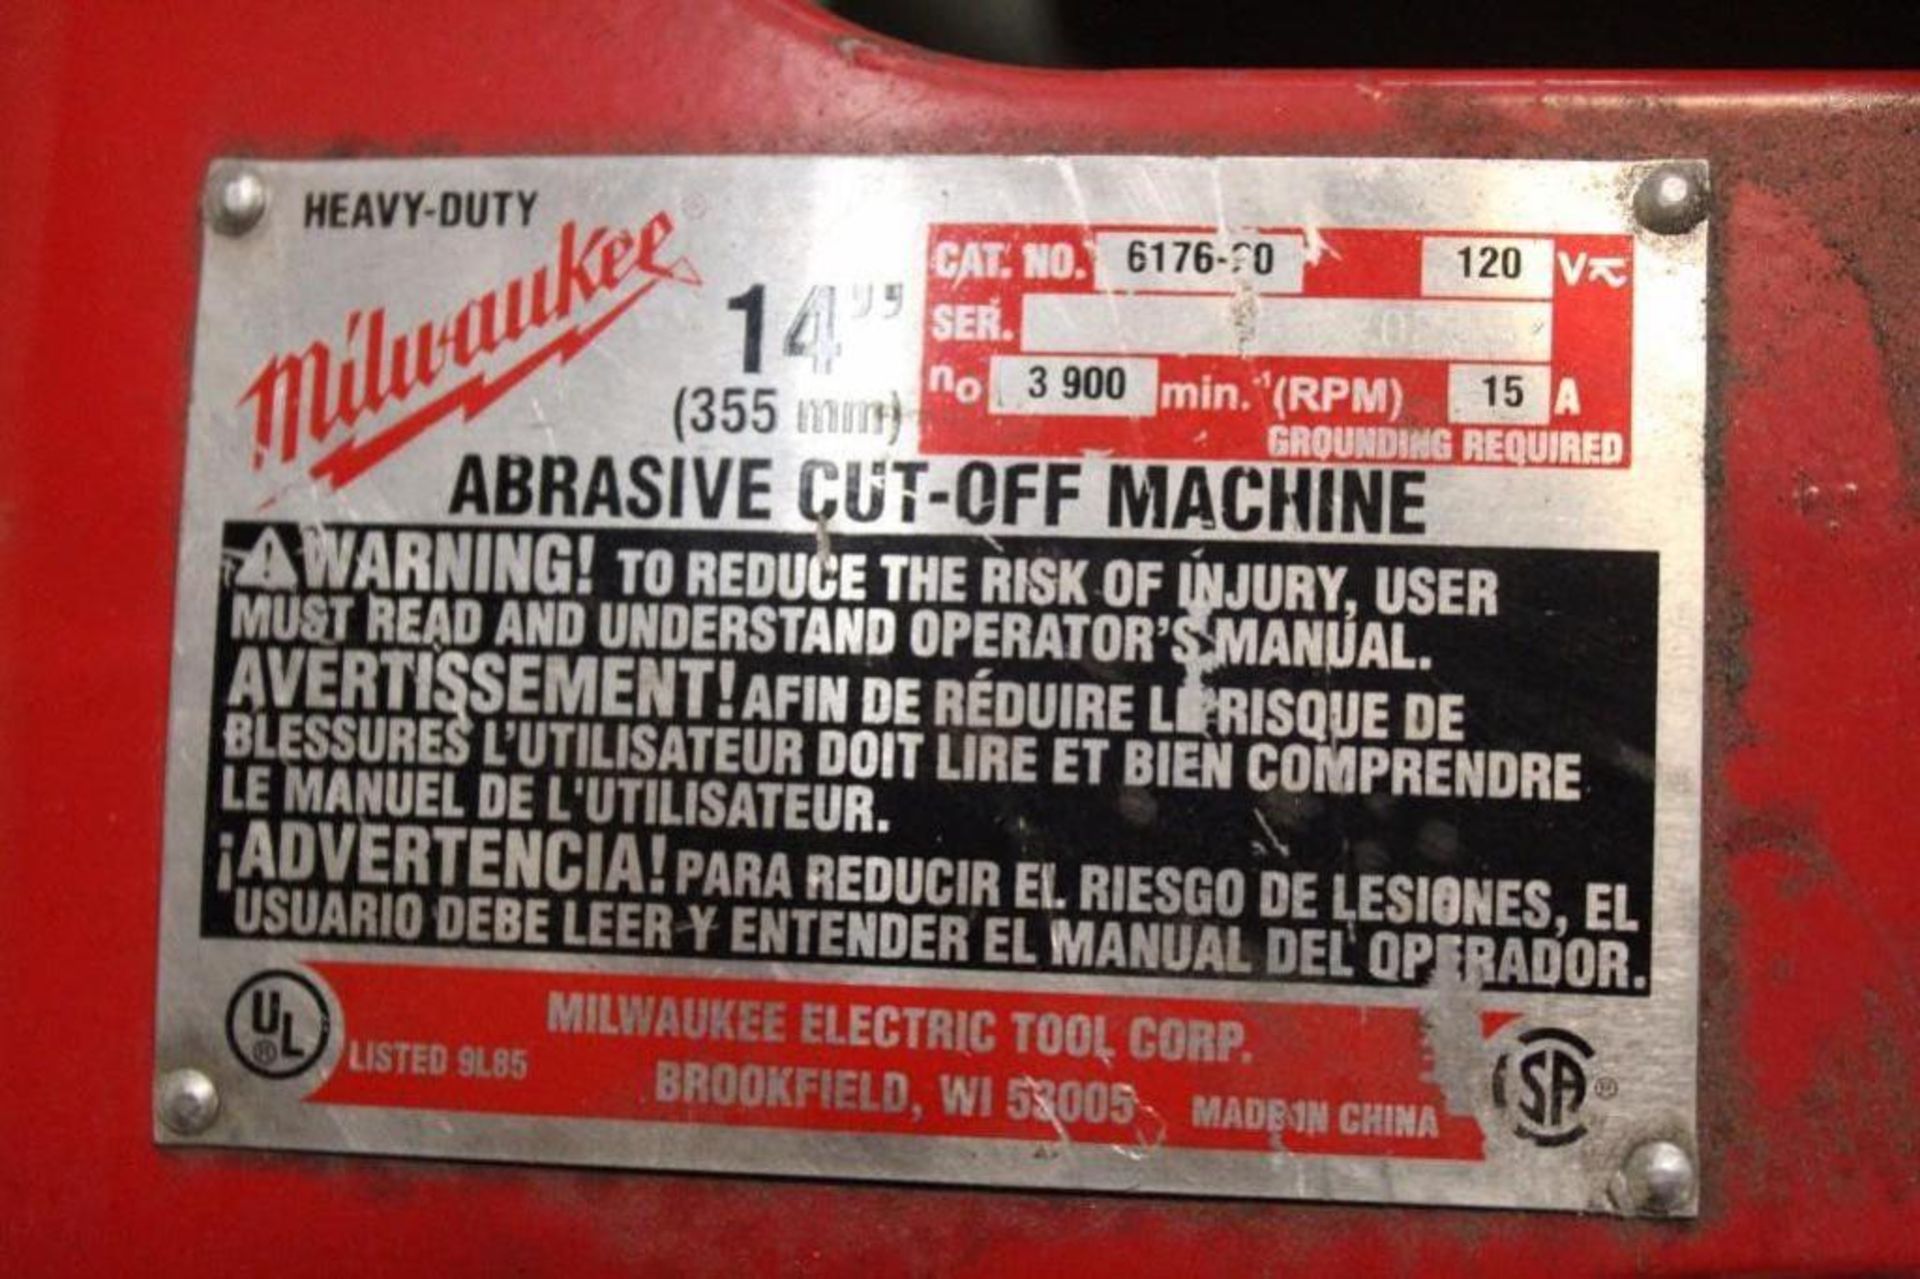 Milwaukee 14-inch abrasive cut-off saw Catalog number 6176 - 20 - Image 3 of 3